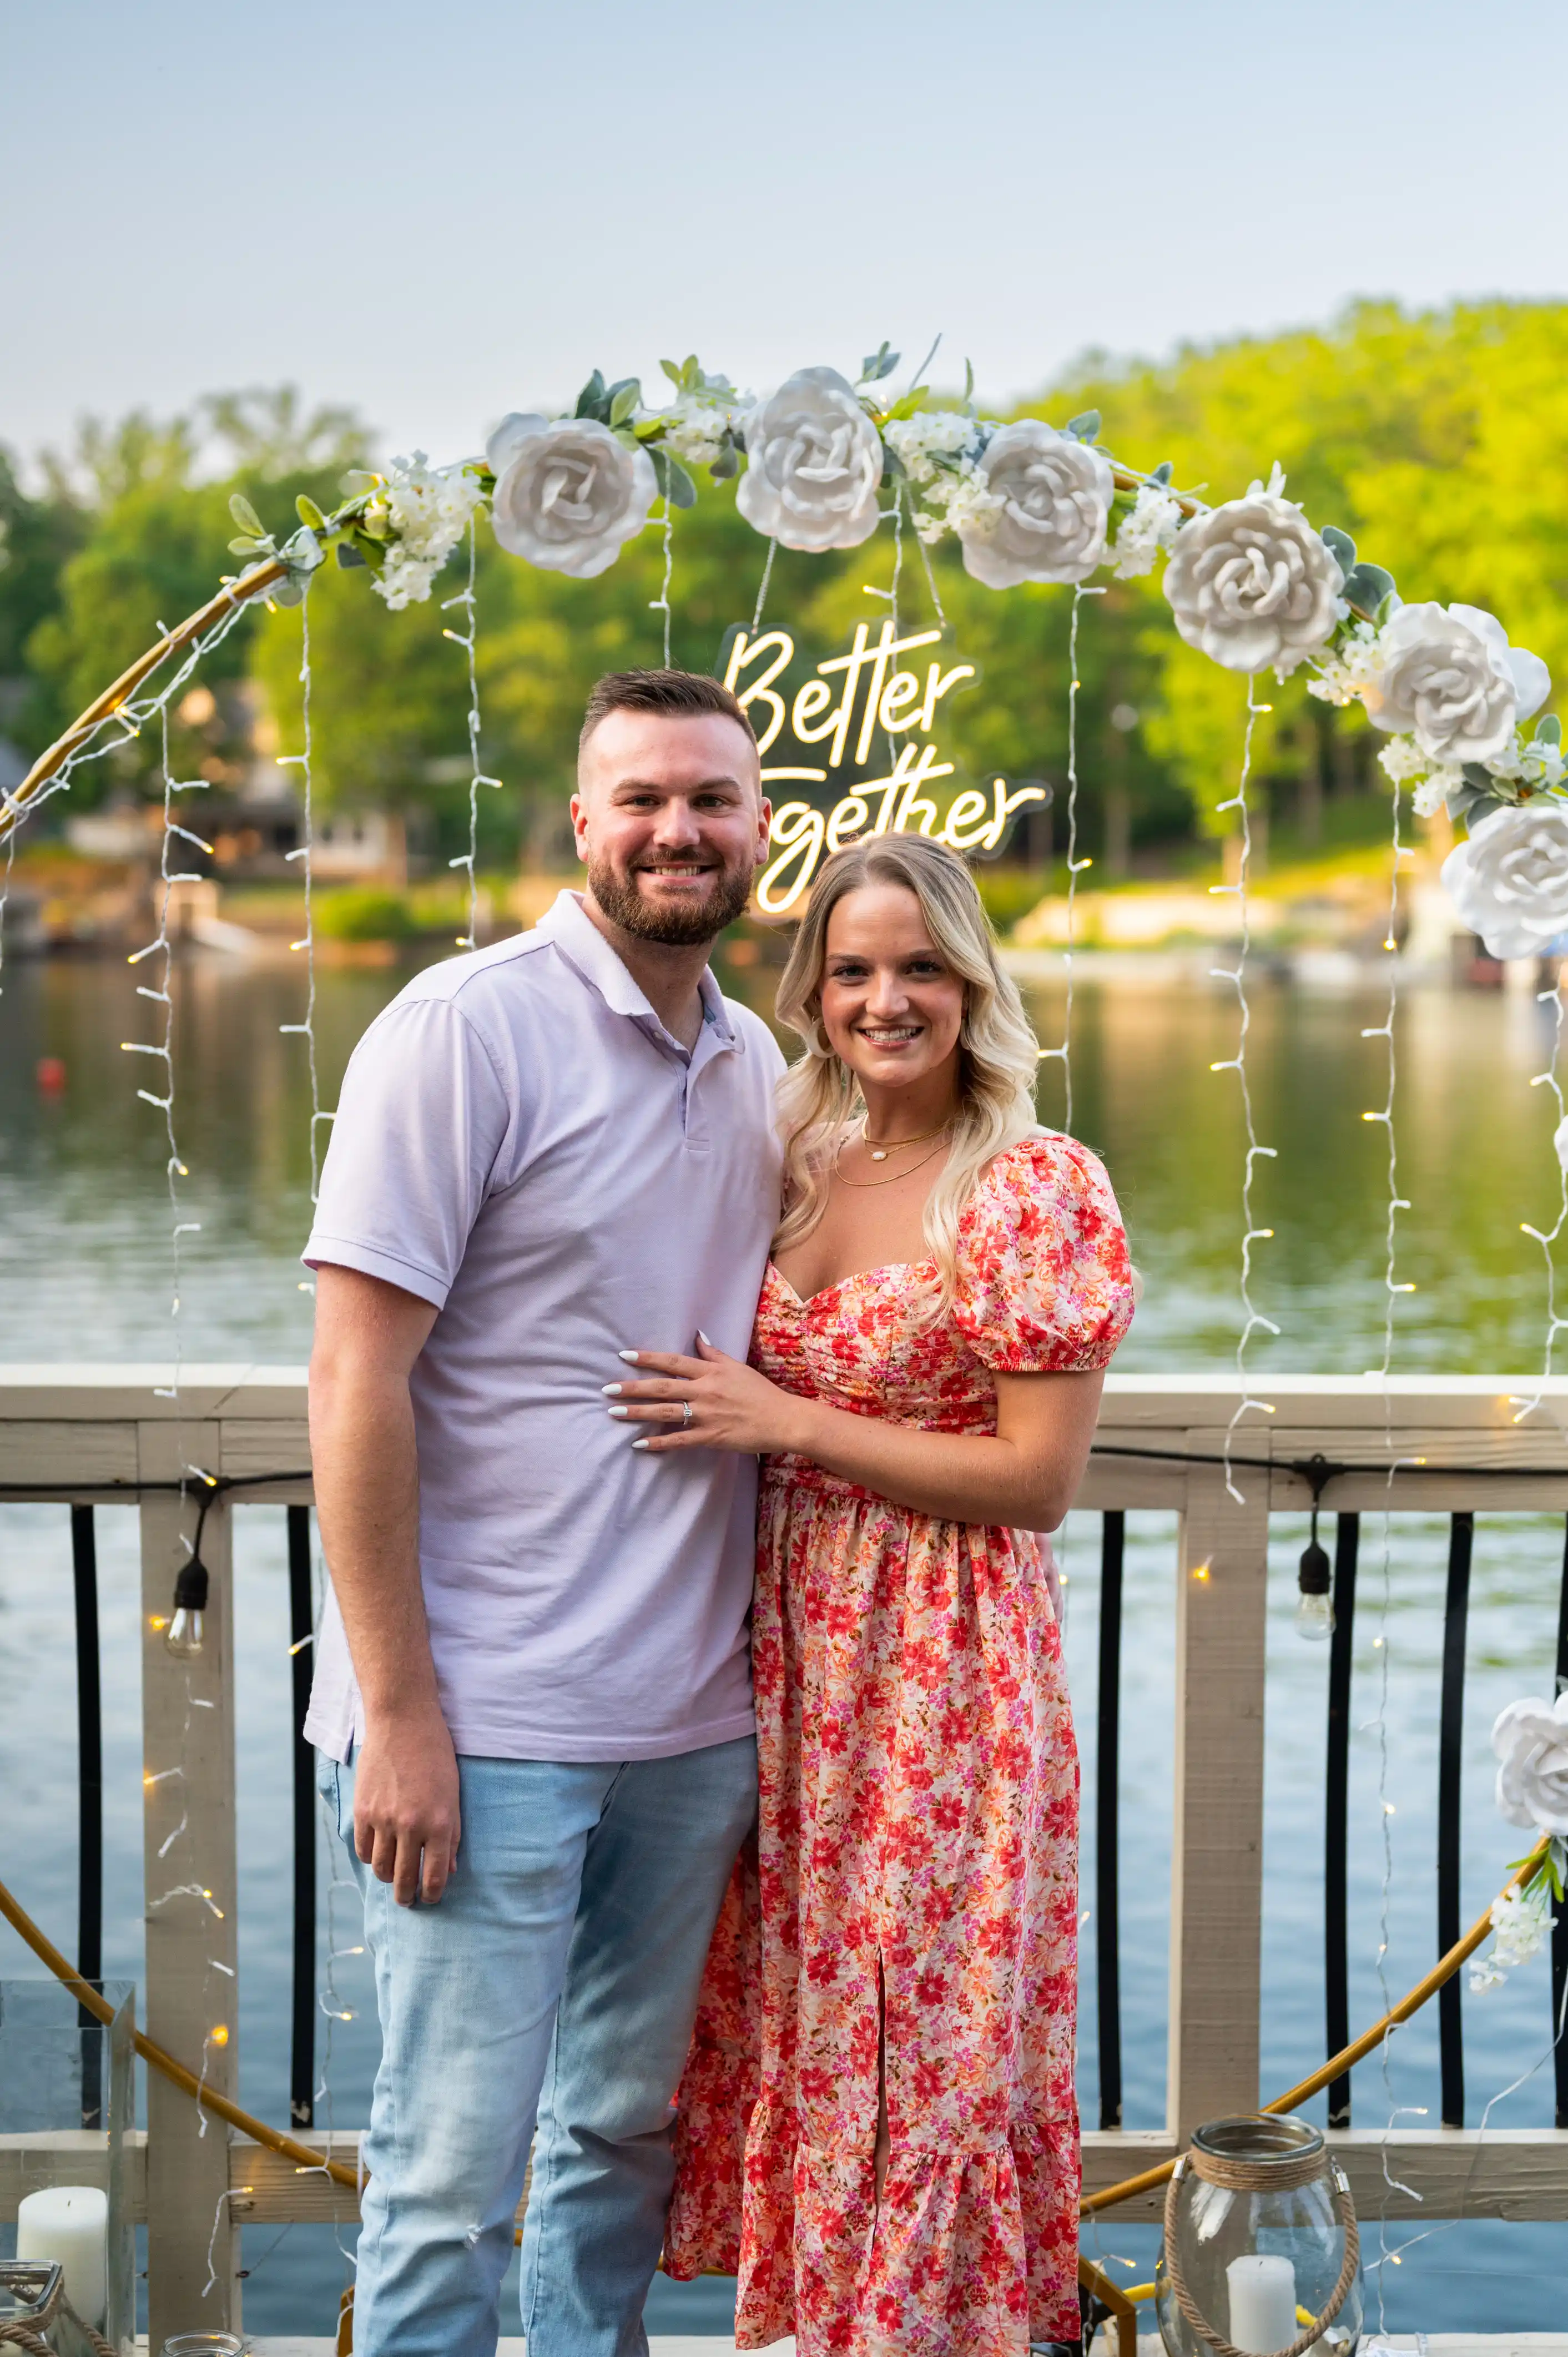 Smiling couple posing for a photo at a baby shower event with a lake and trees in the background, decorations with "Baby Shower" text overhead.